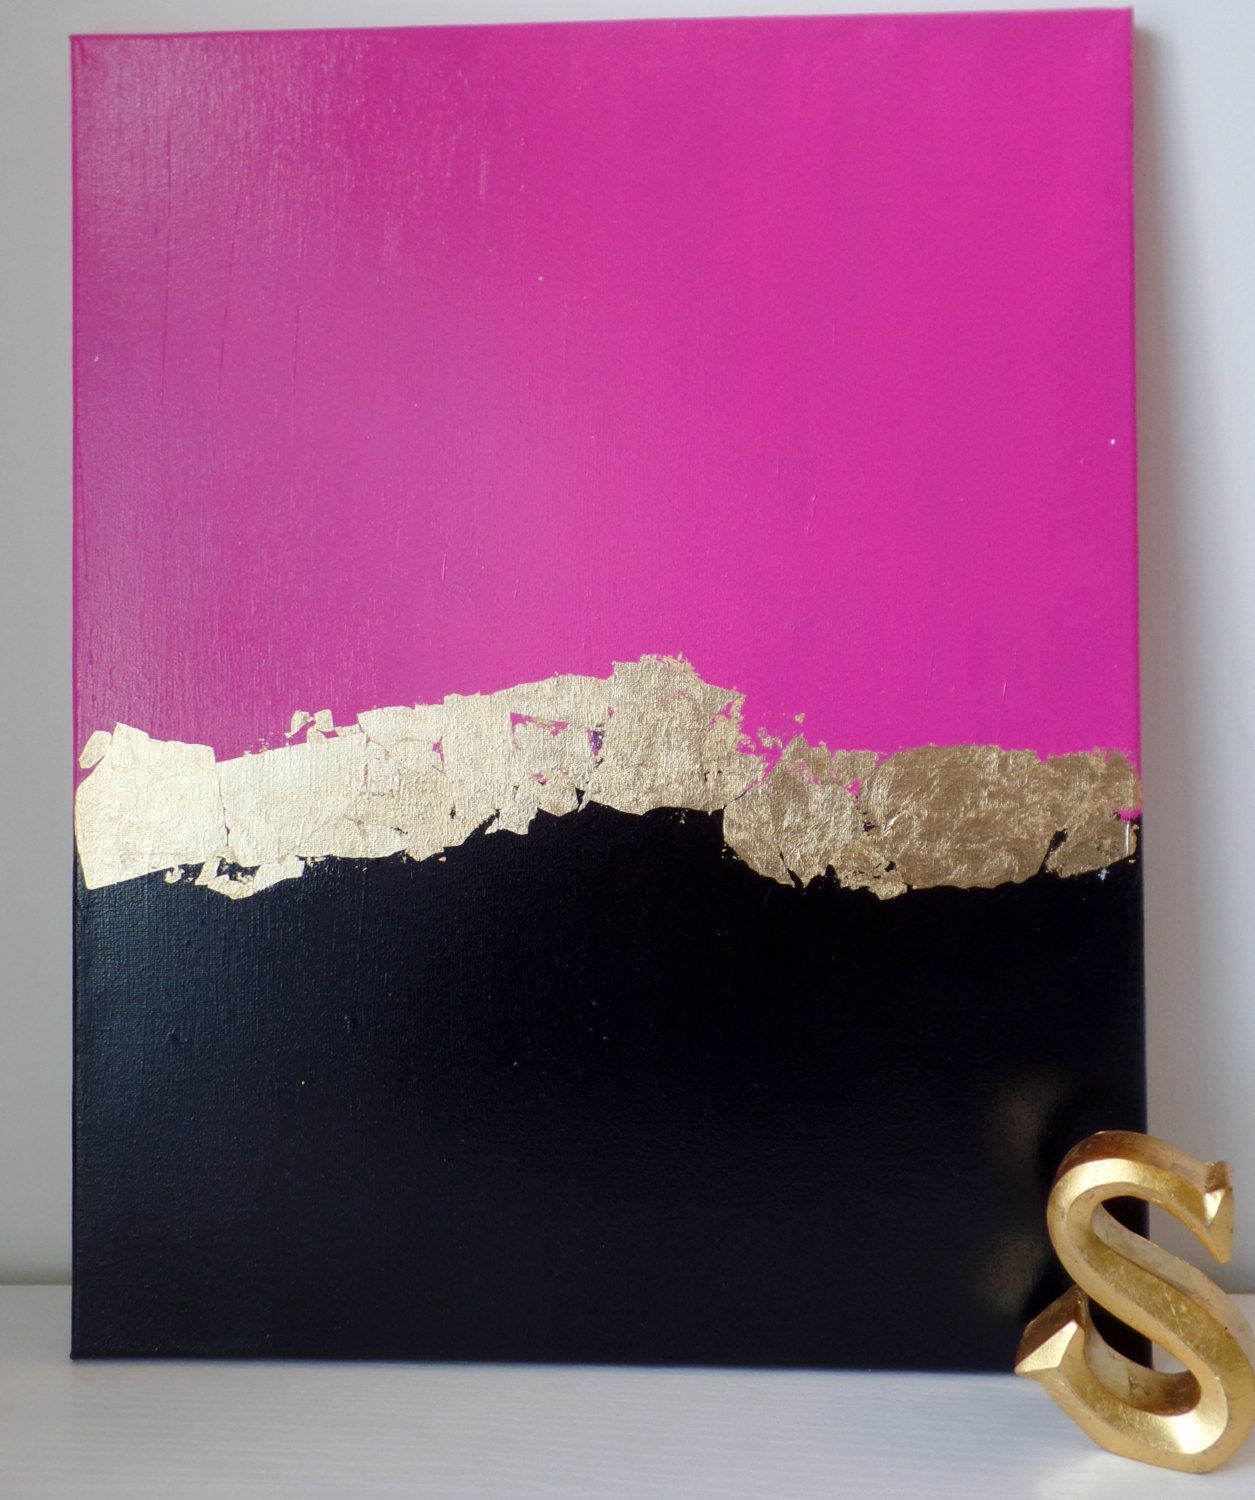 FREE SHIPPING – Kate Spade Inspired Acrylic Painting Canvas, Pink, Gold Leaf, Black, Office Home Wall Decor, Trendy Fashion Style